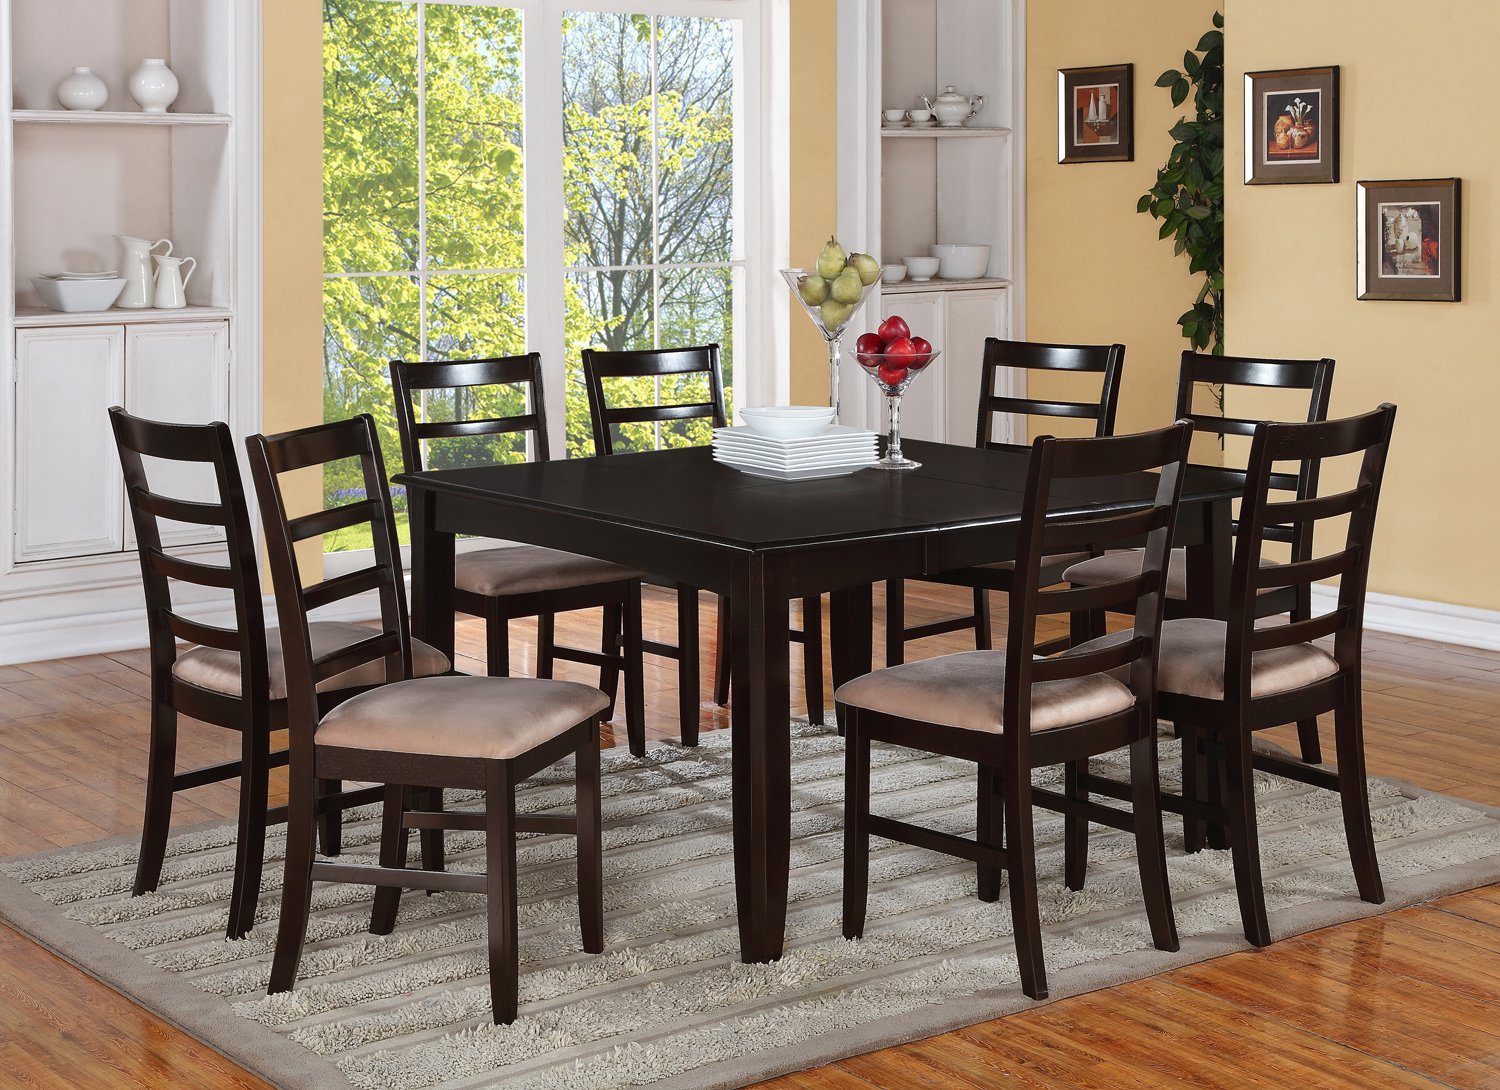 Trudiogmor: Square Dining Table Set 8 Seater